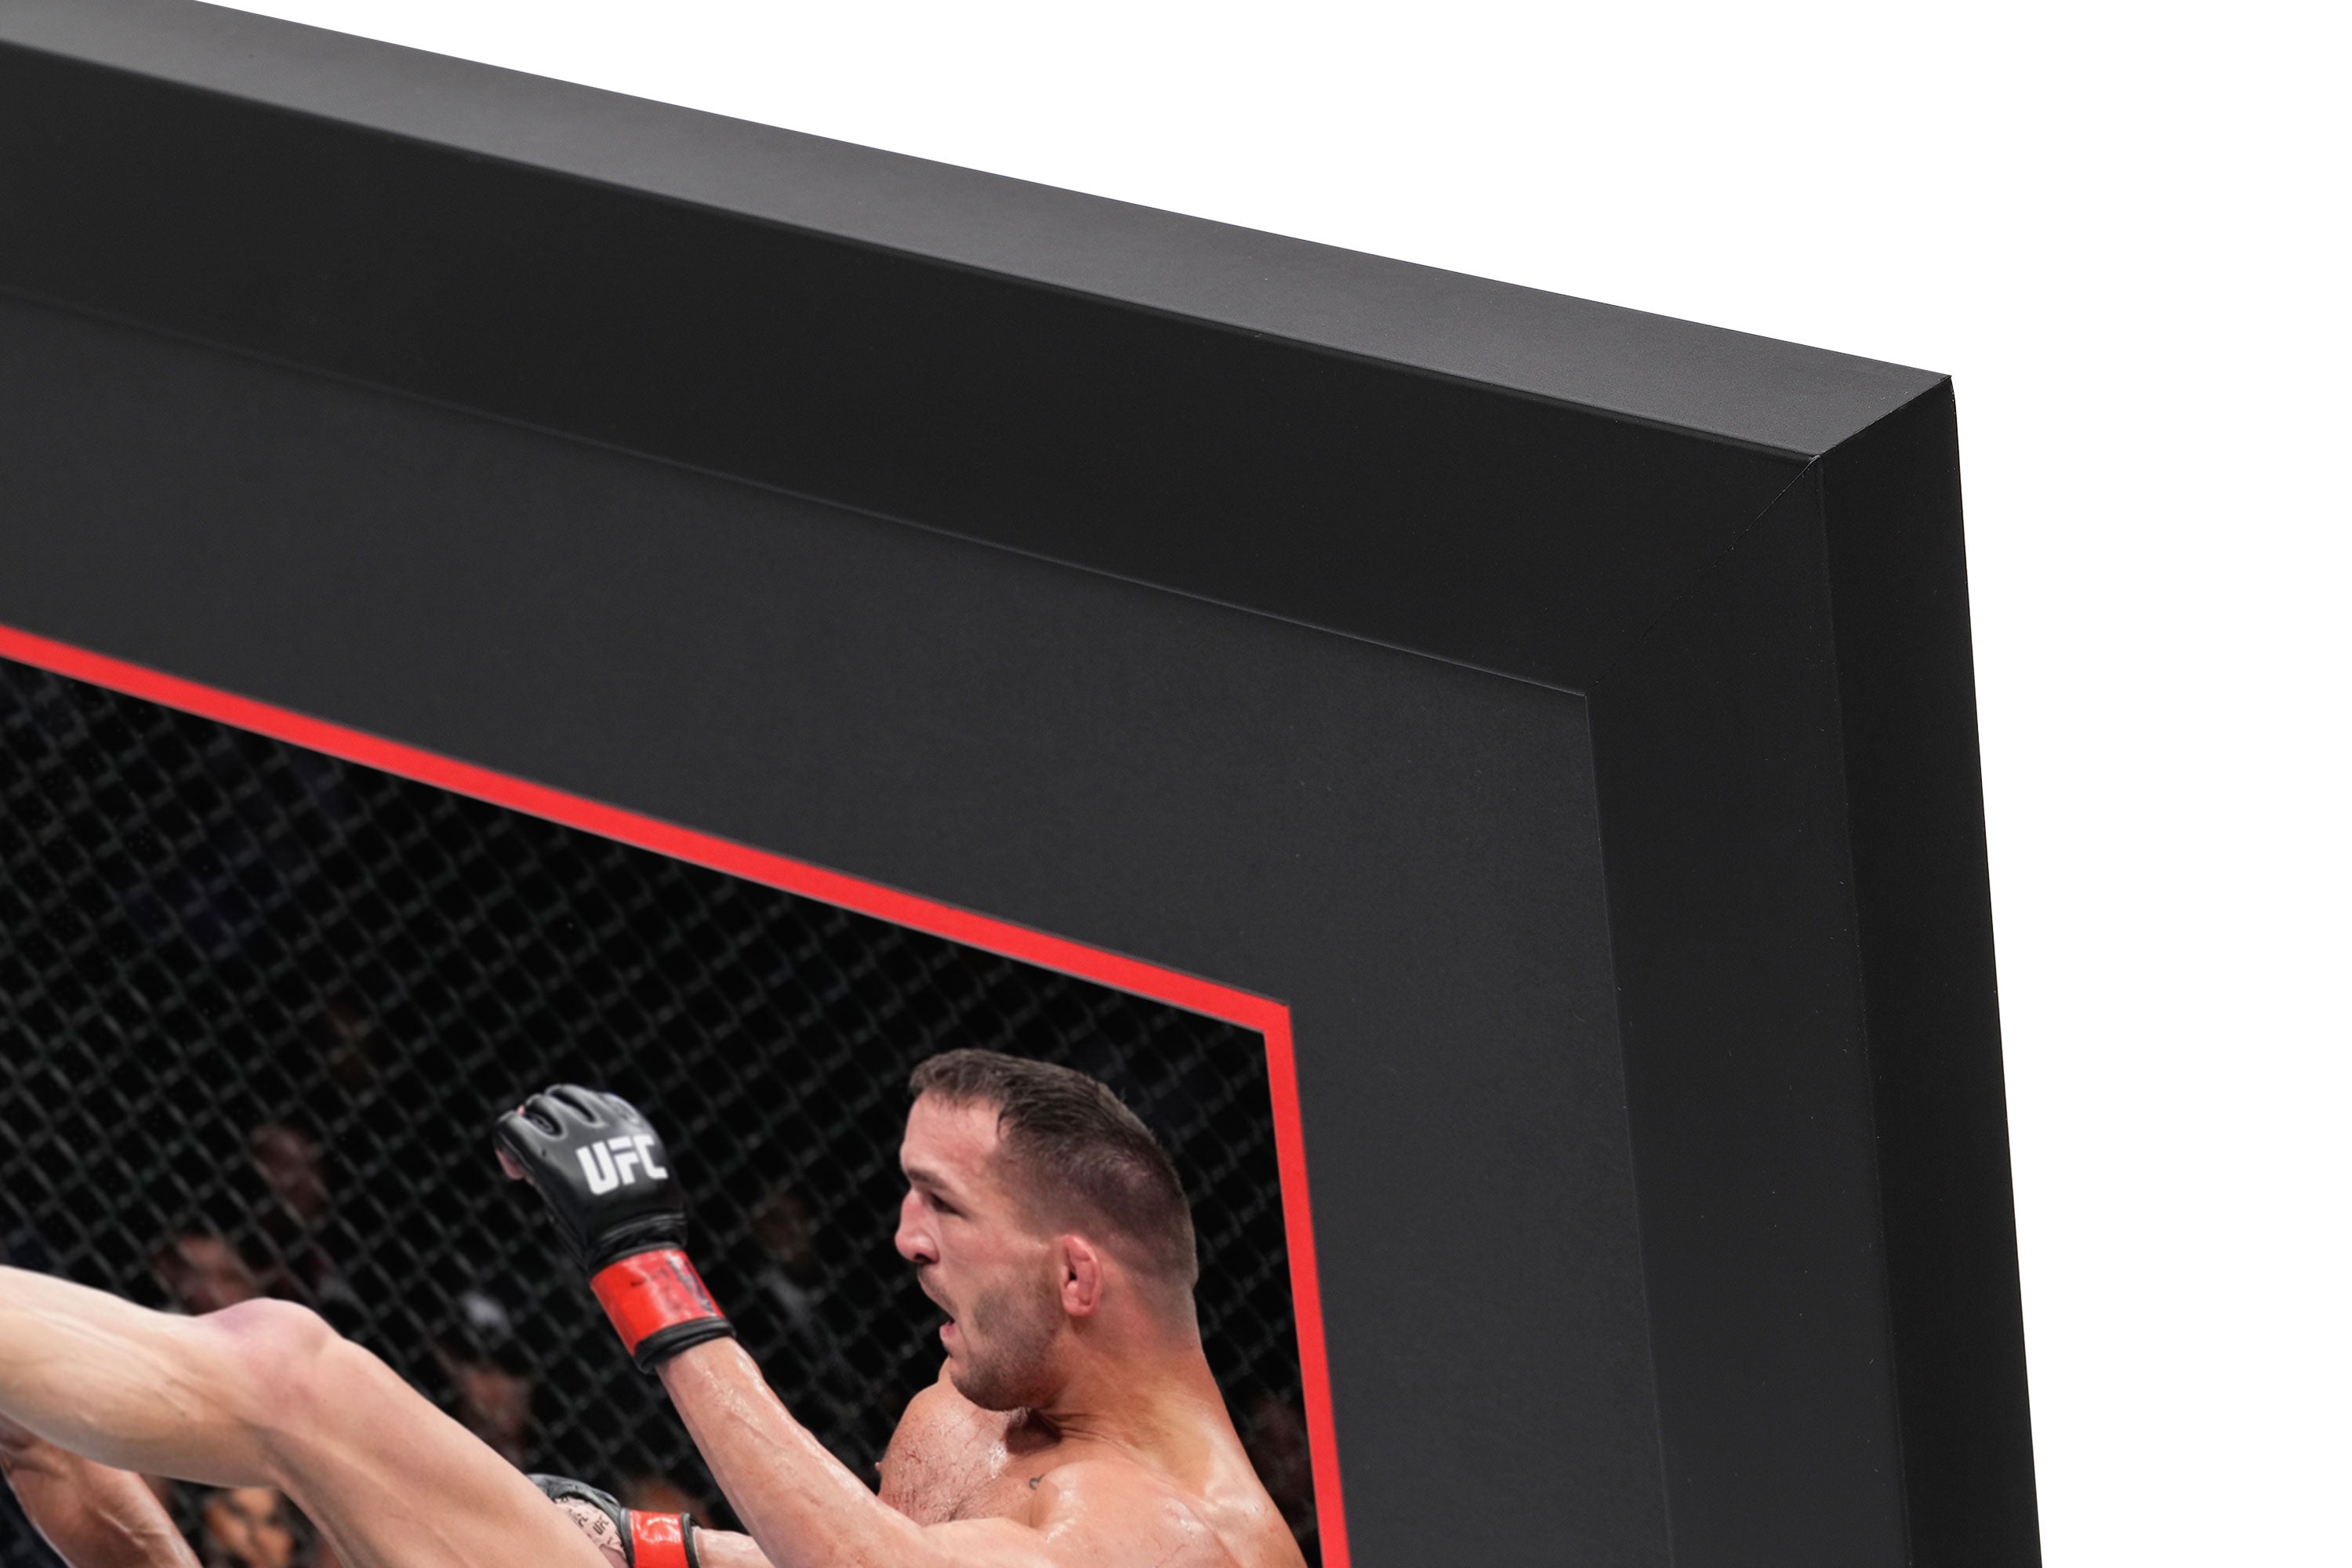 Photo & canvas from UFC 274 event